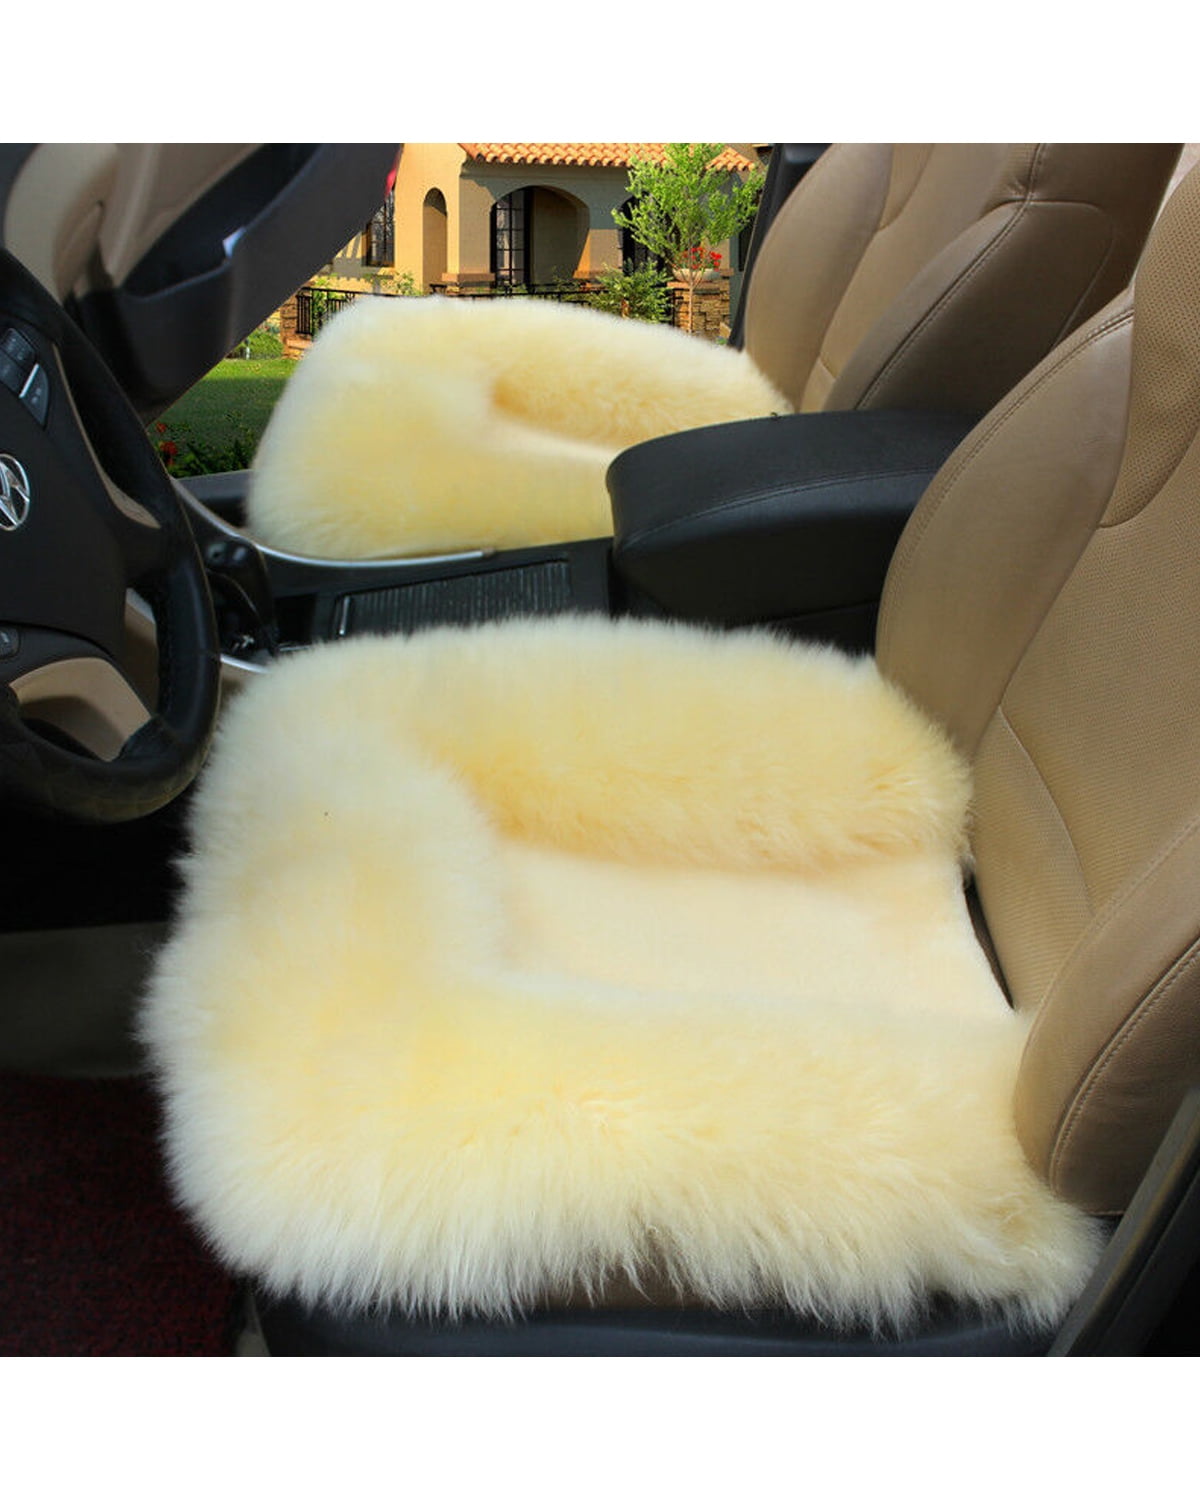 Pale Mauve Universal Wool Soft Warm Fuzzy Auto Car Seat Covers Front Rear Cover Car Cushion Chair Pad 